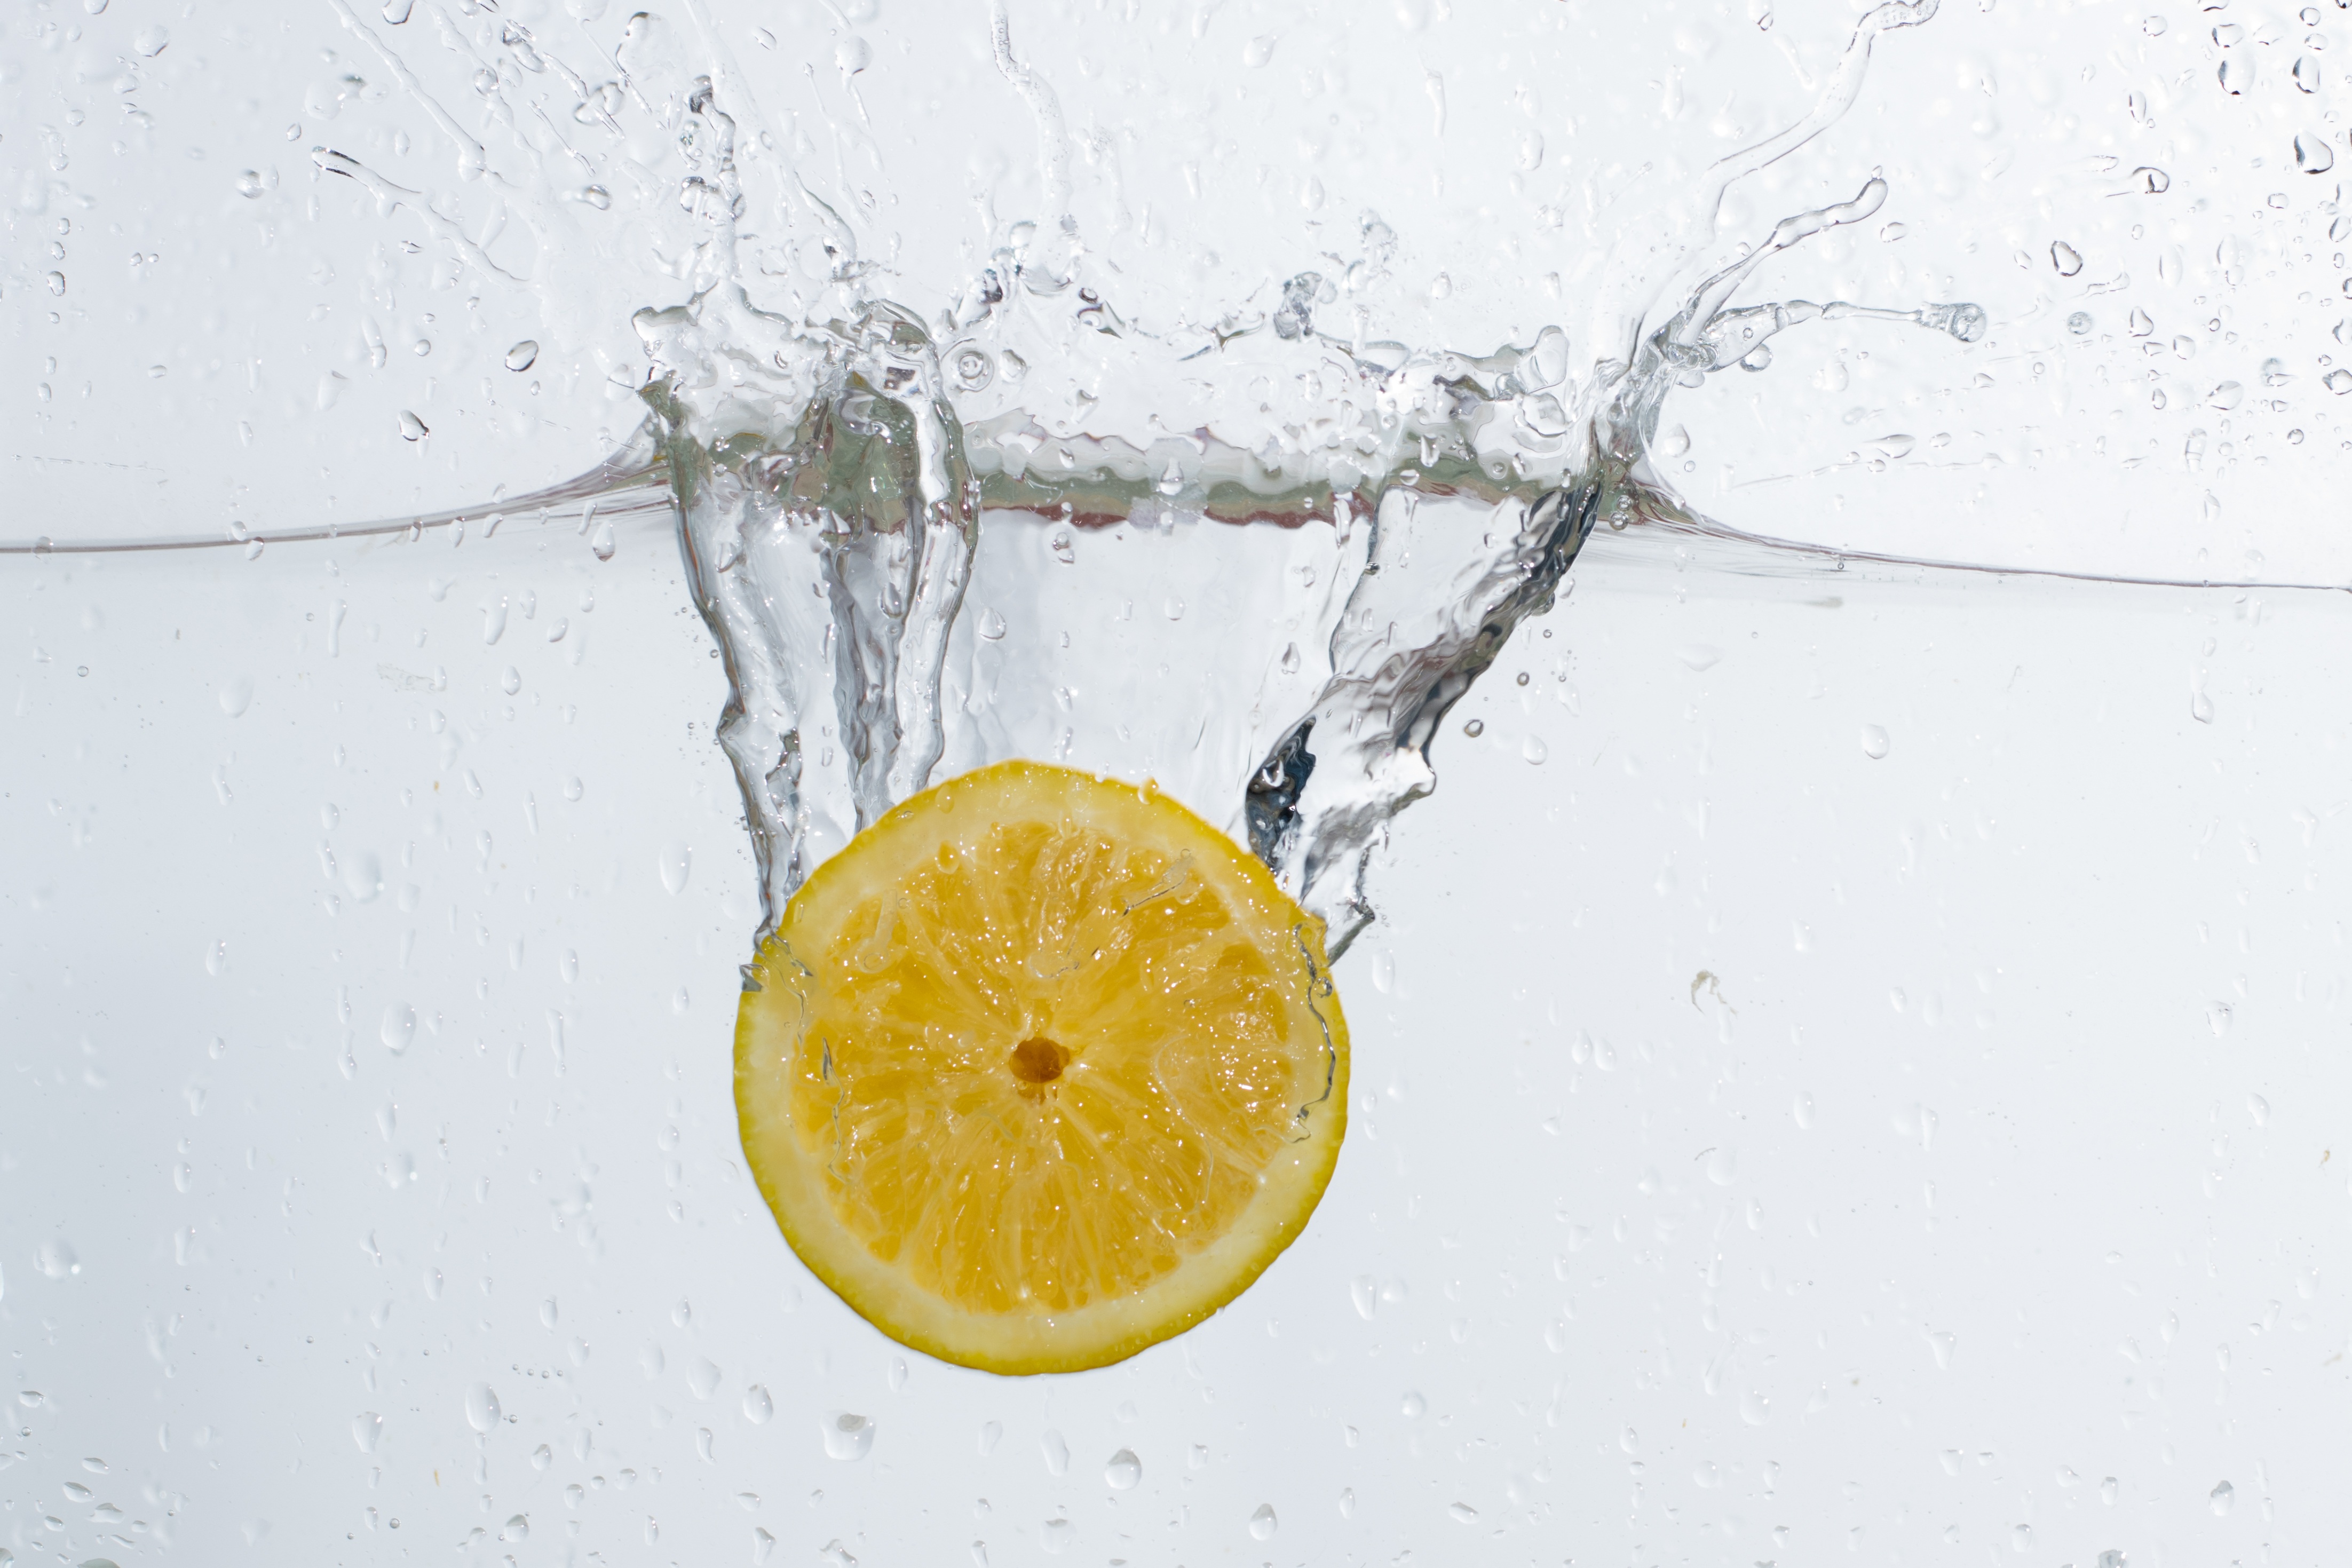 Free photo A slice of lemon falls into the water